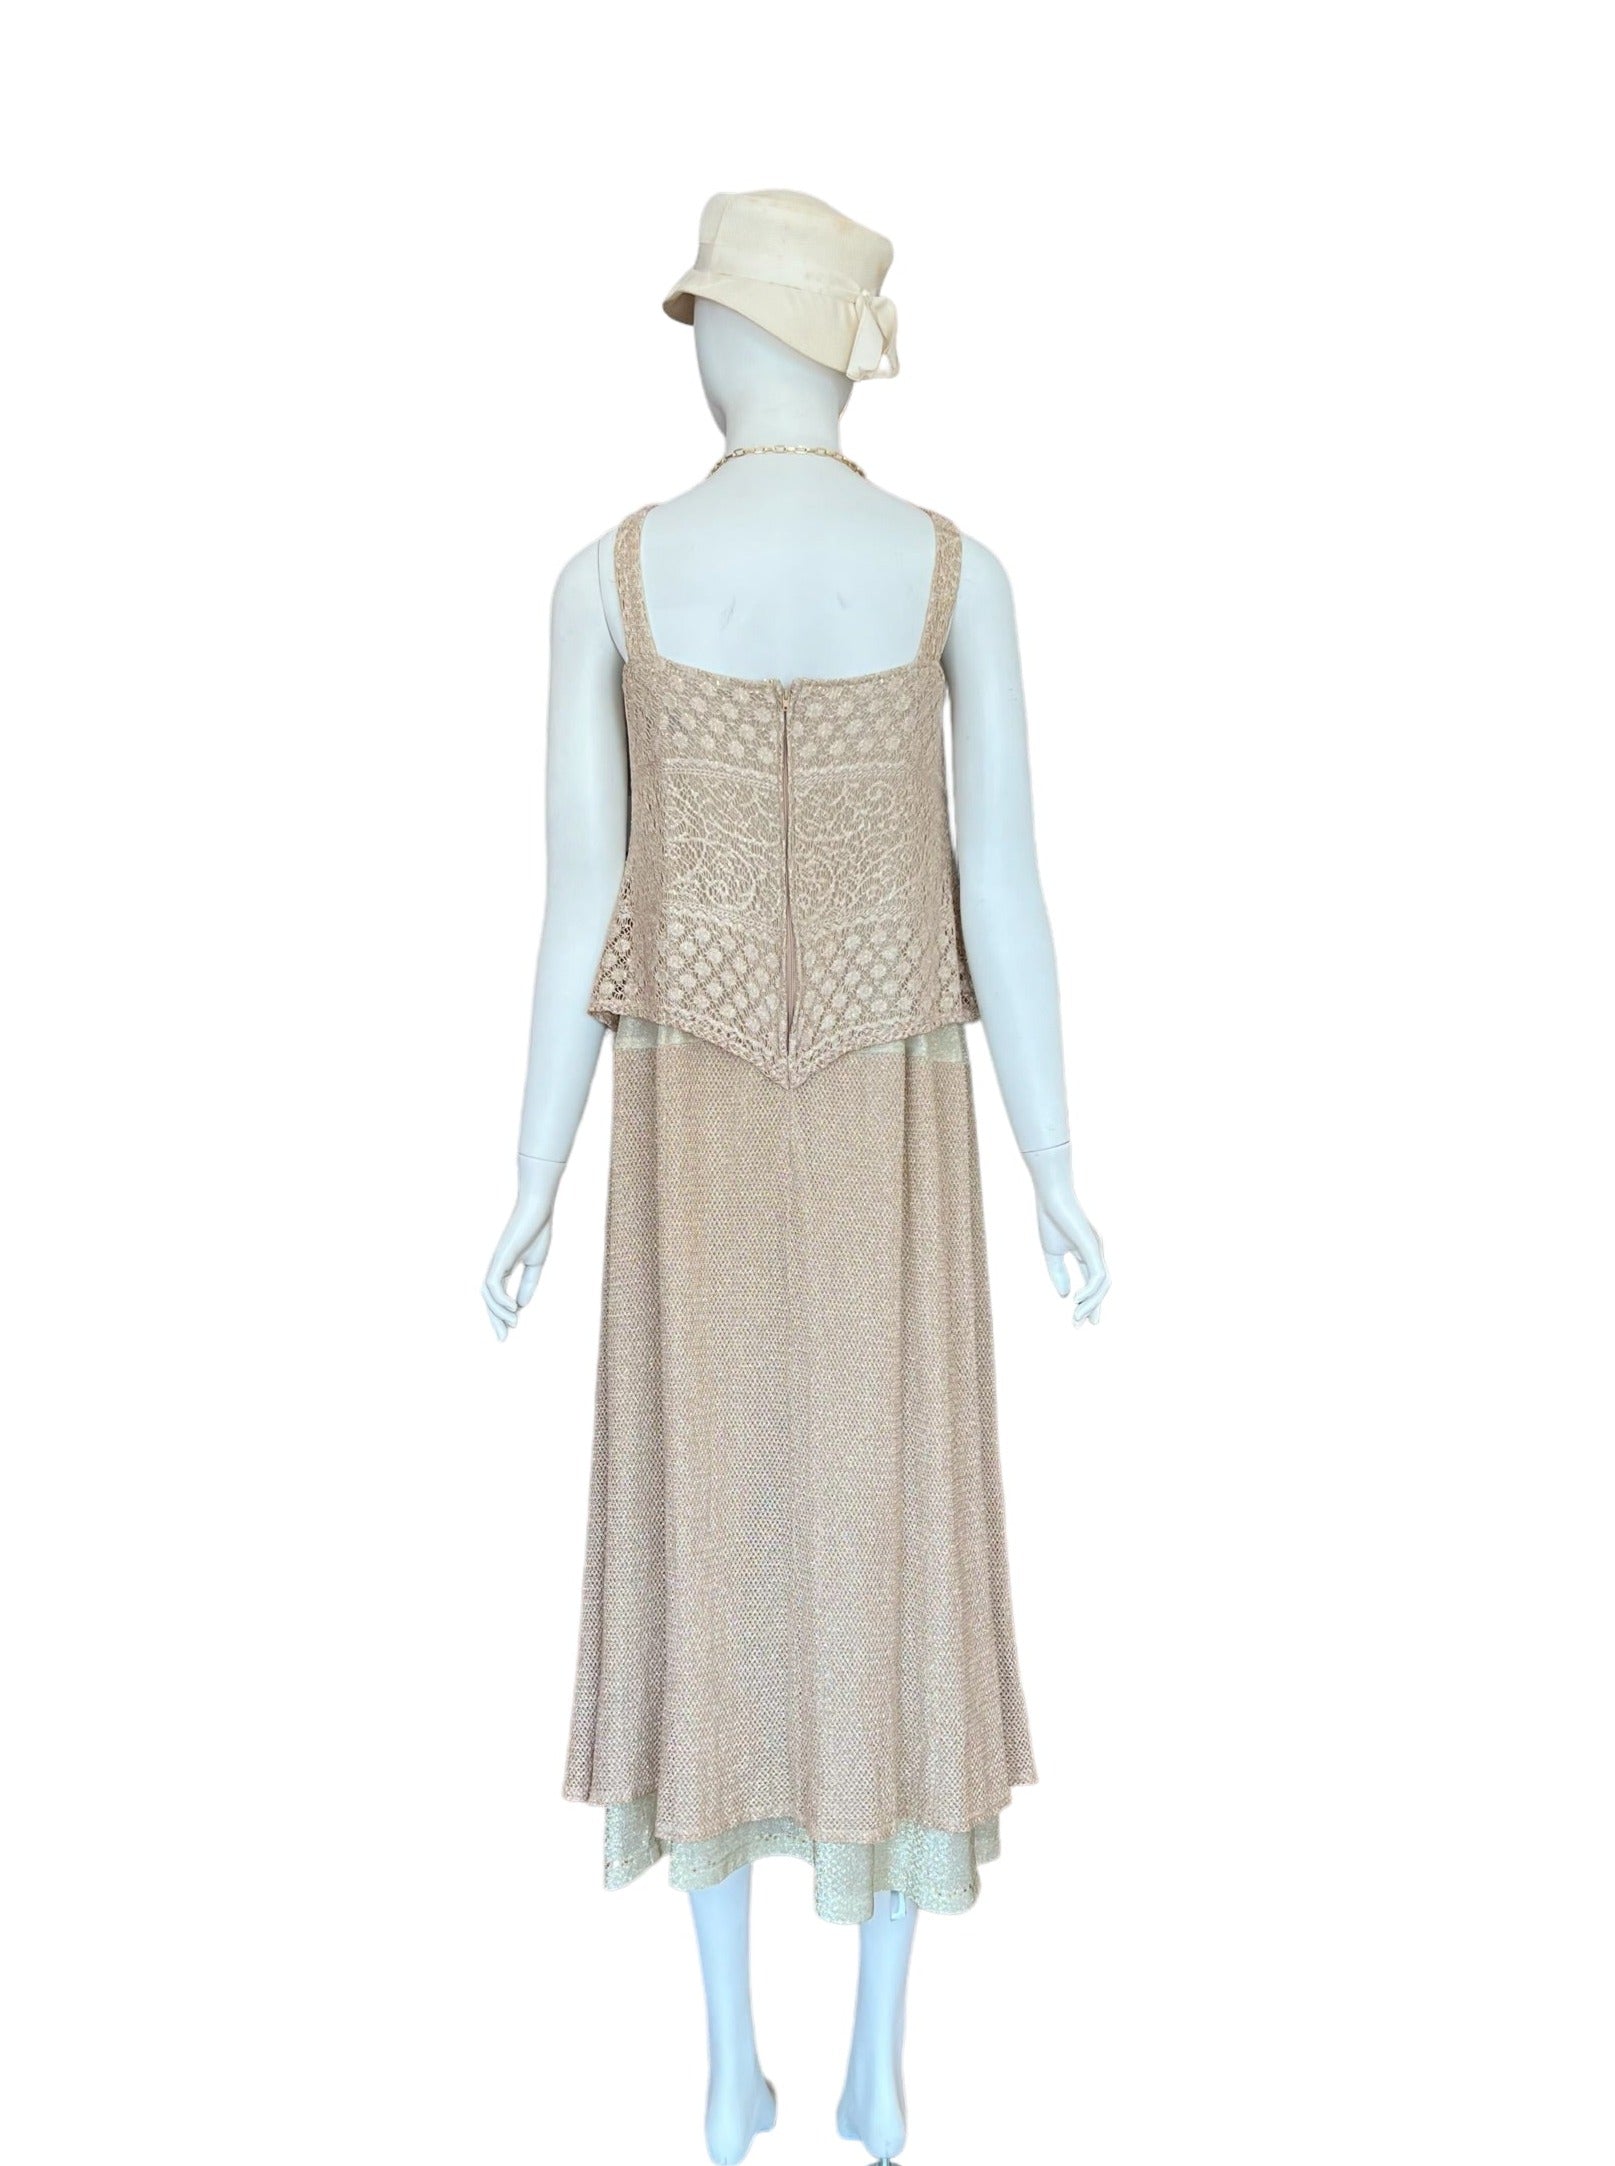 Gold shimmery sleeveless cocktail dress - netting layers and flapper vibes